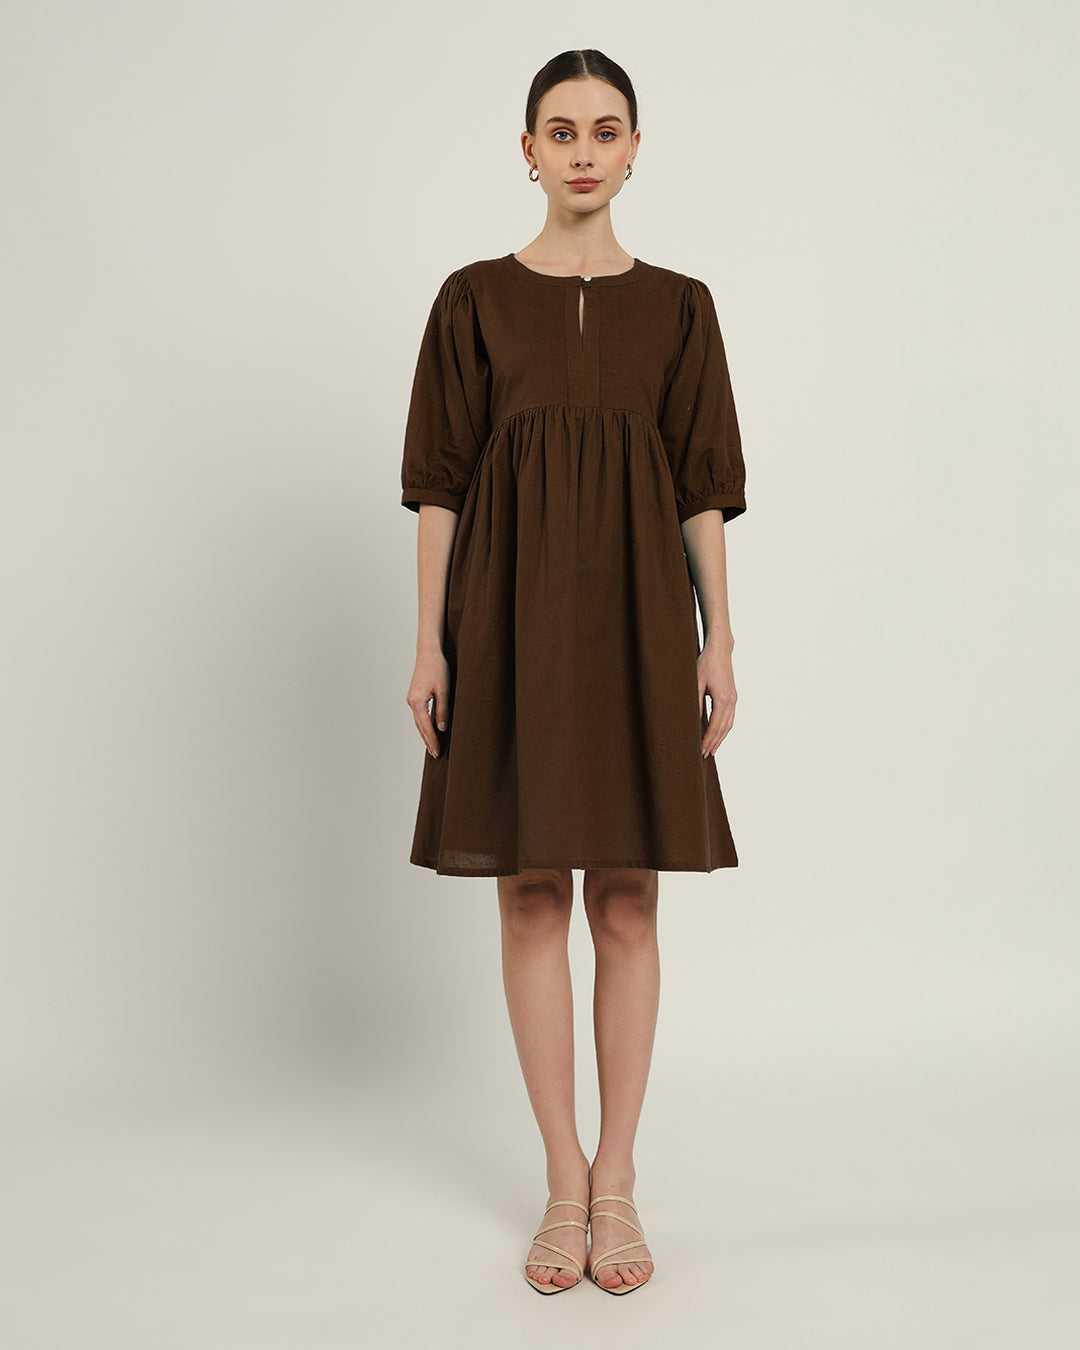 The Aira Nutshell Cotton Dress